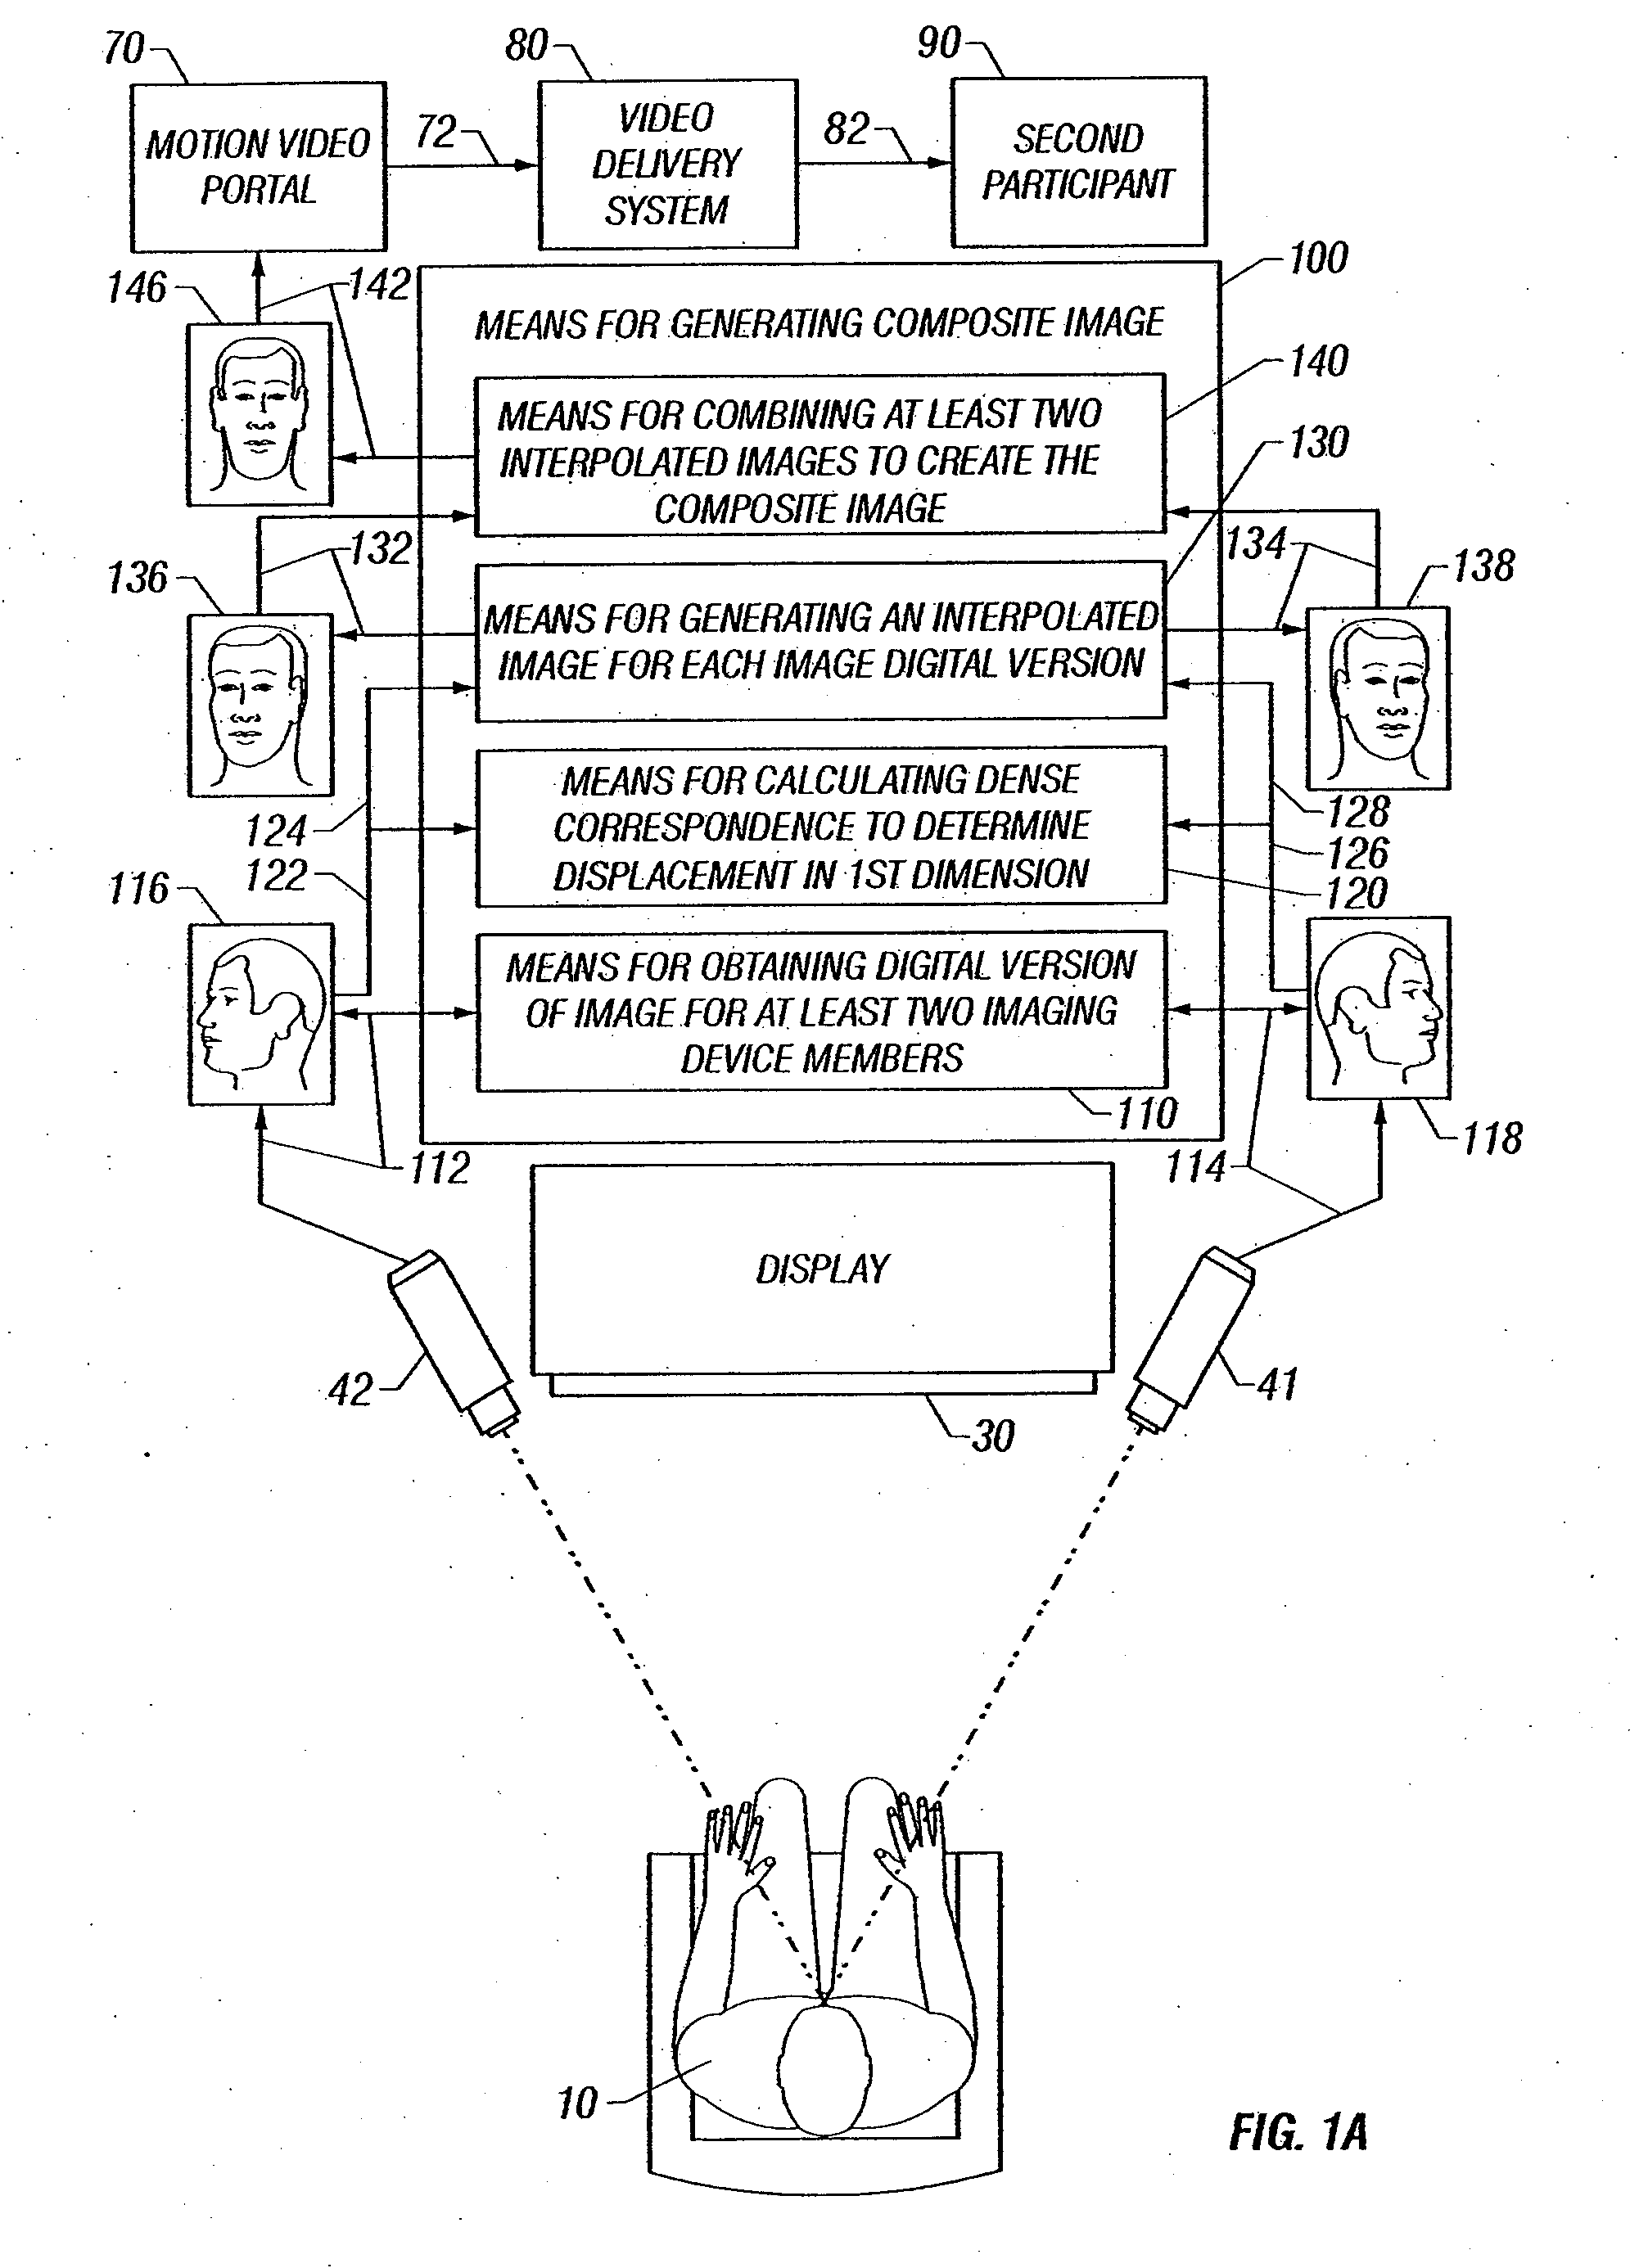 Method of Maintaining Eye Contact in Video Conferencing Using View Morphing